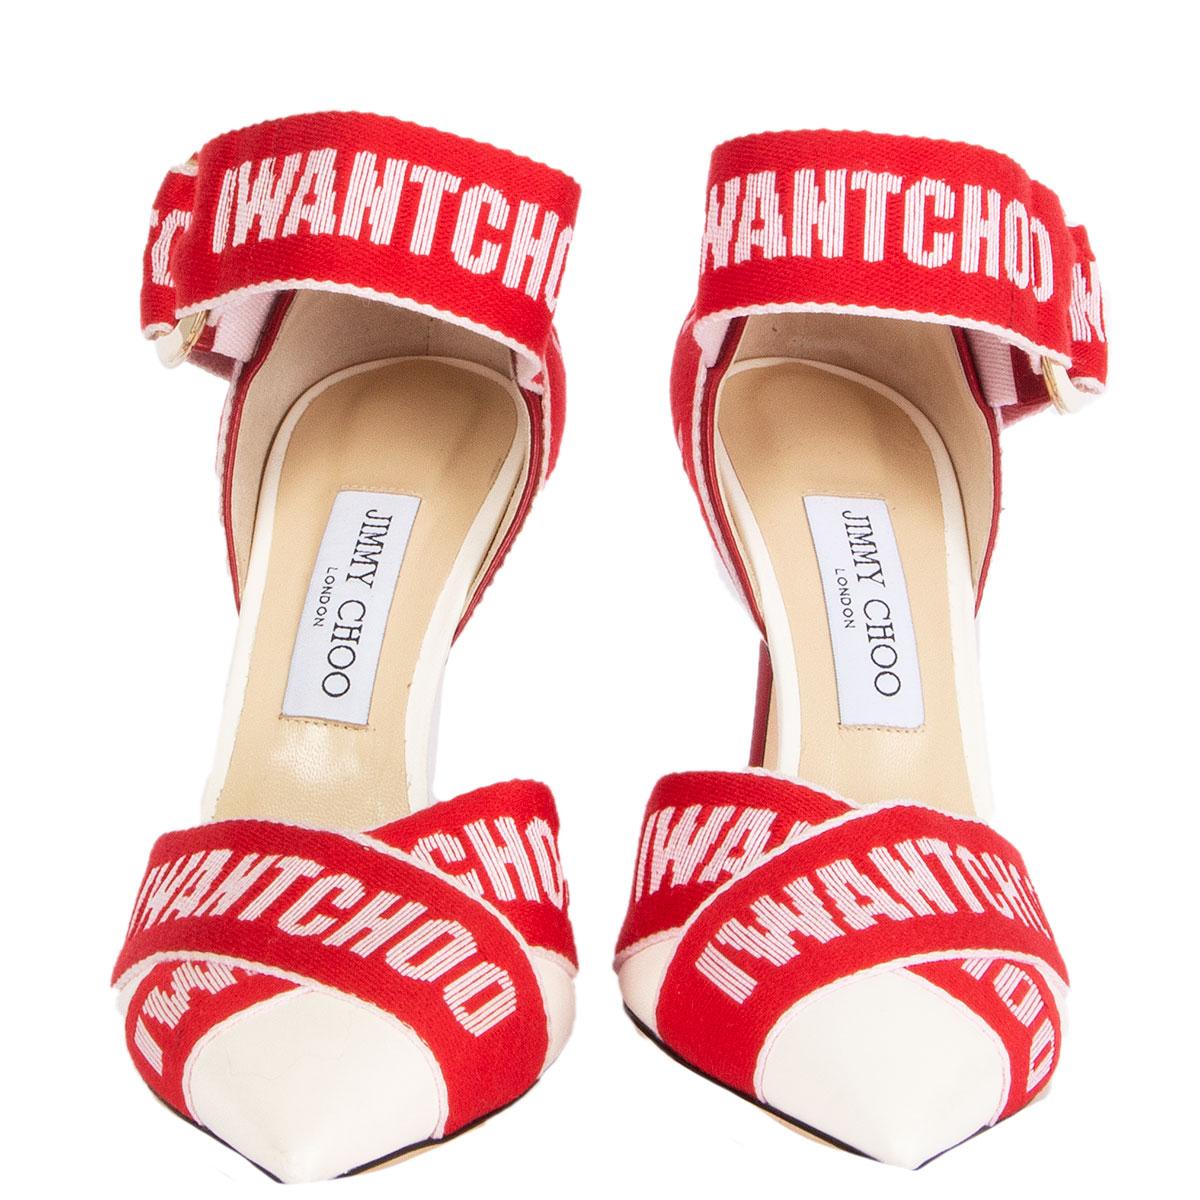 100% authentic Jimmy Choo Bea 100 pointed-toe pumps in red and off-white logo tape with light gold-tone metal buckle fastening at the ankle. Off-white and red leather tip and heel. Brand new. Come with dust bag. 

Imprinted Size	39
Shoe